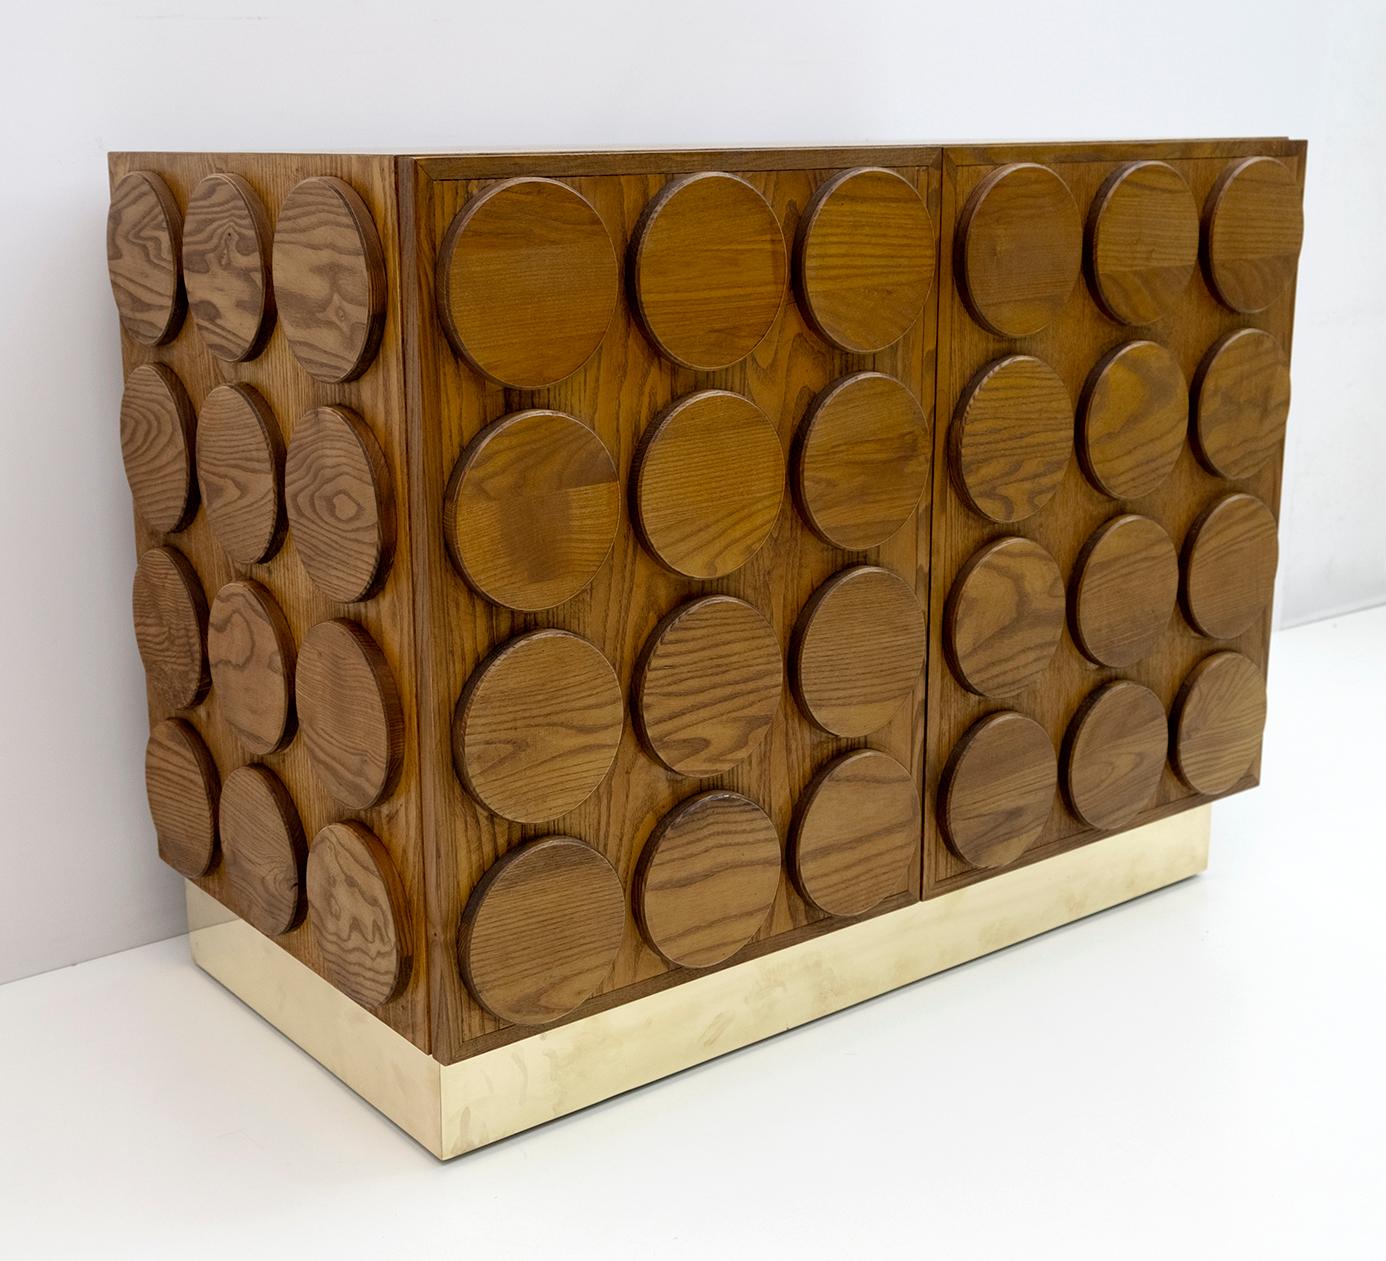 Brutalist dry bar cabinet in chestnut wood. With geometric and harmonious lines, the piece of furniture is also embellished by the brass band below.